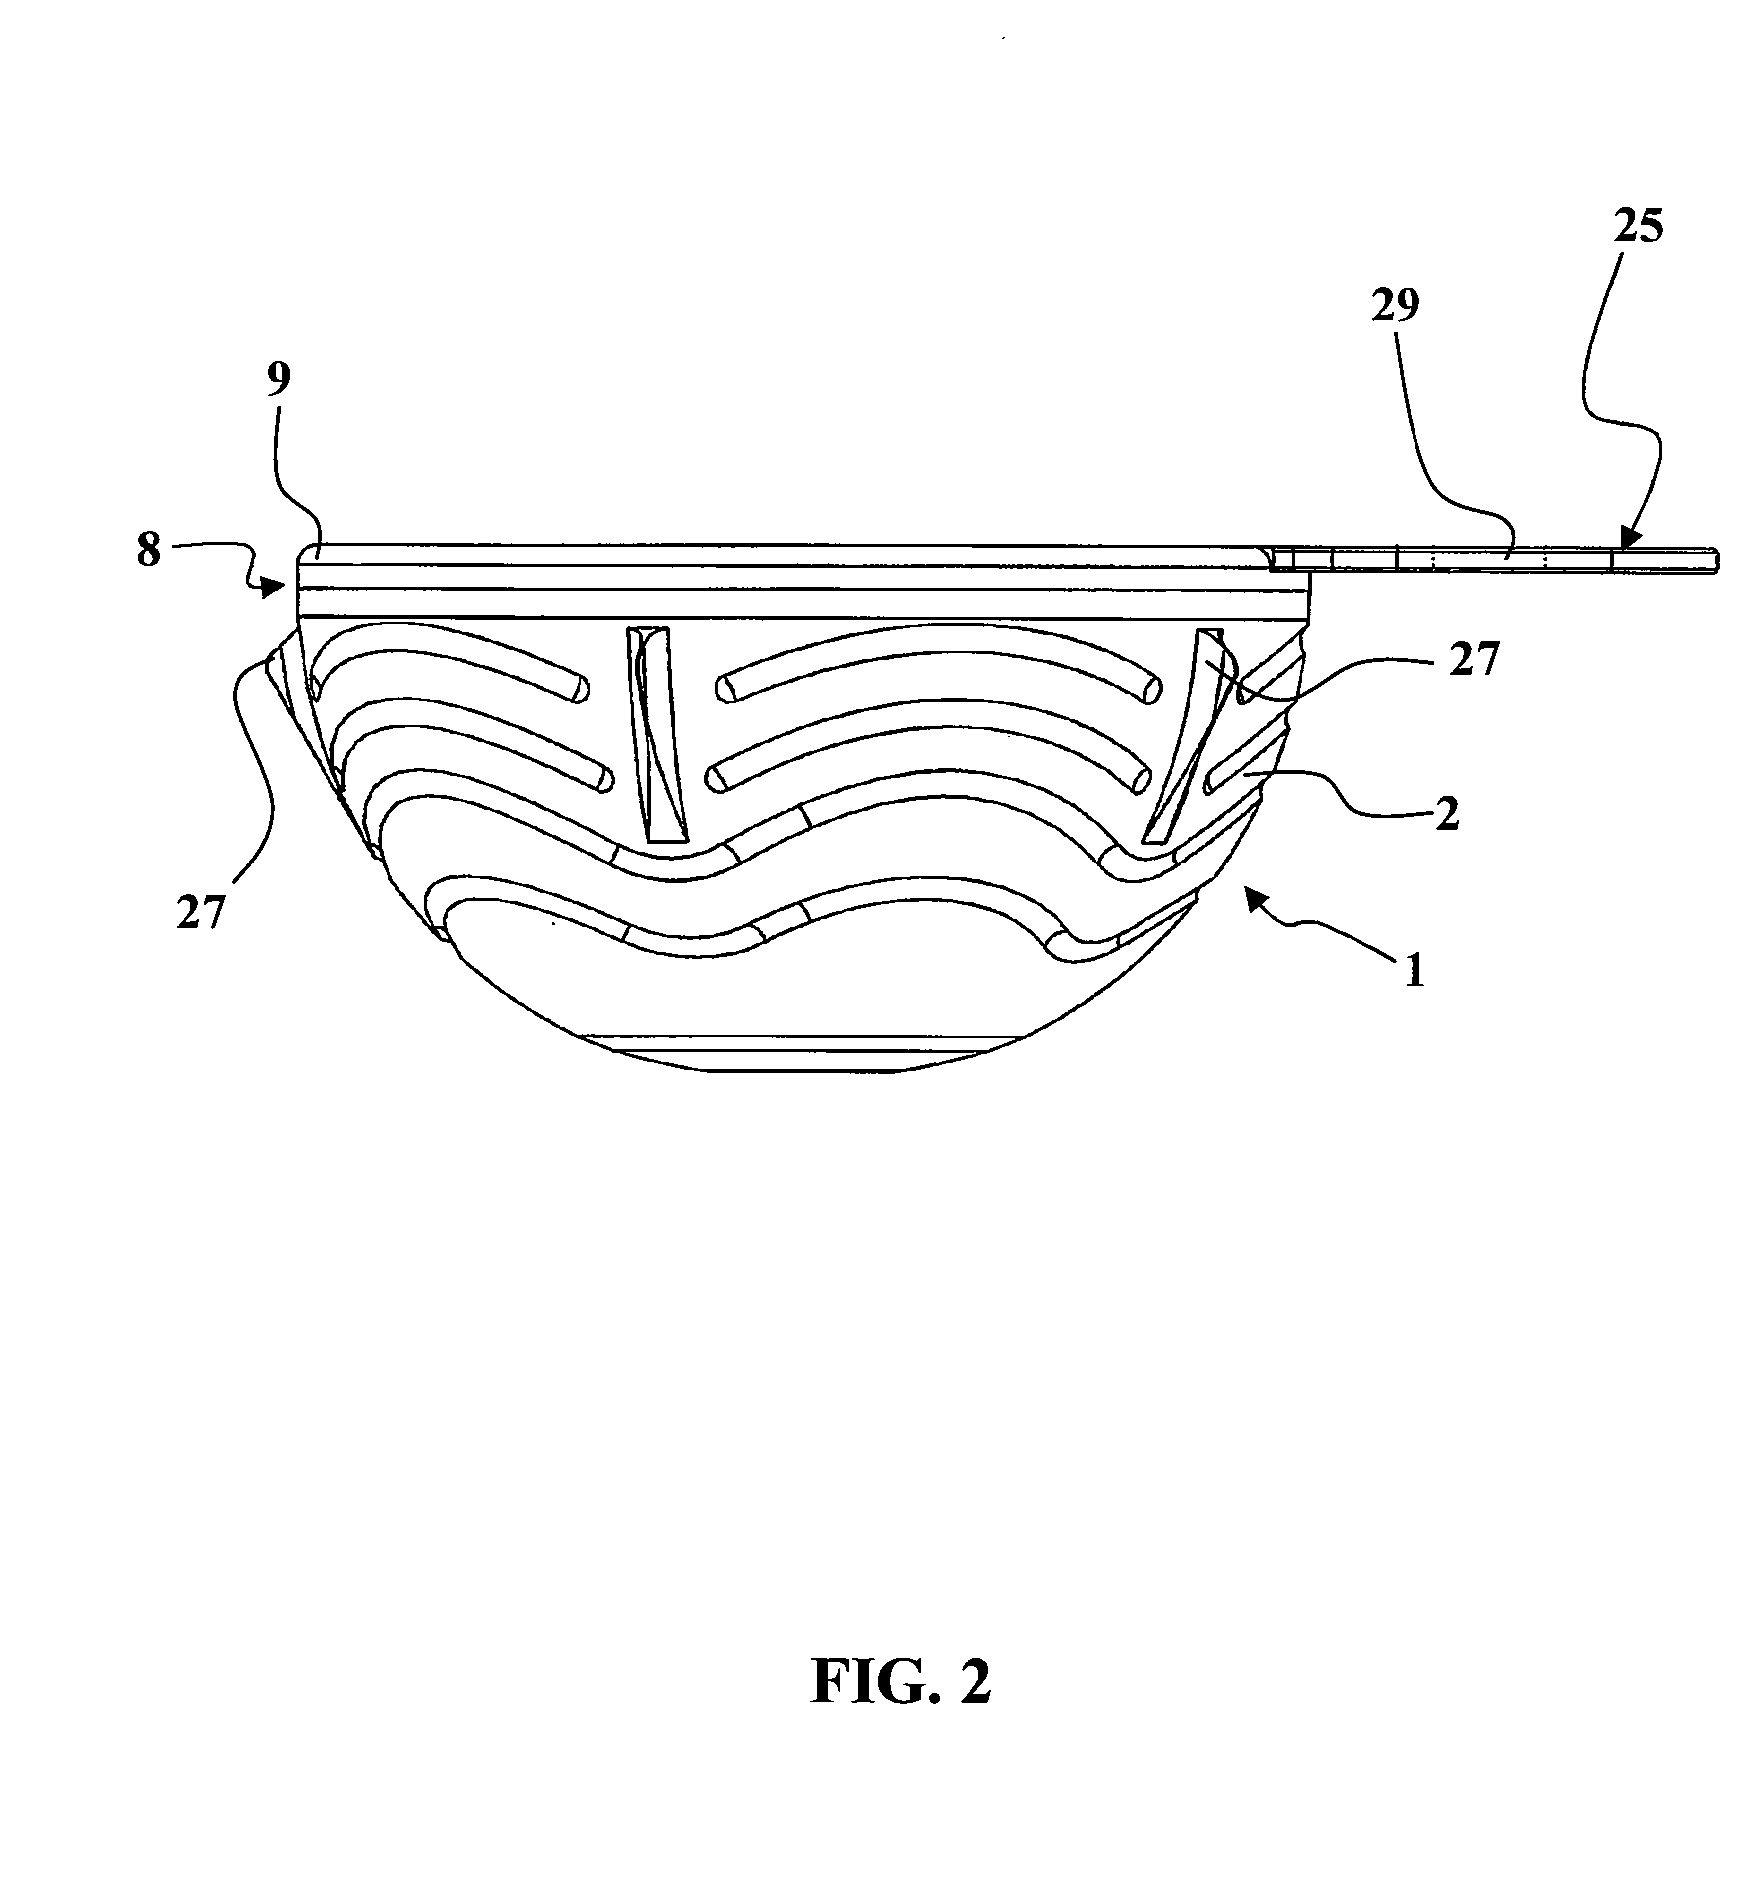 Cotyle comprising a sterile interface